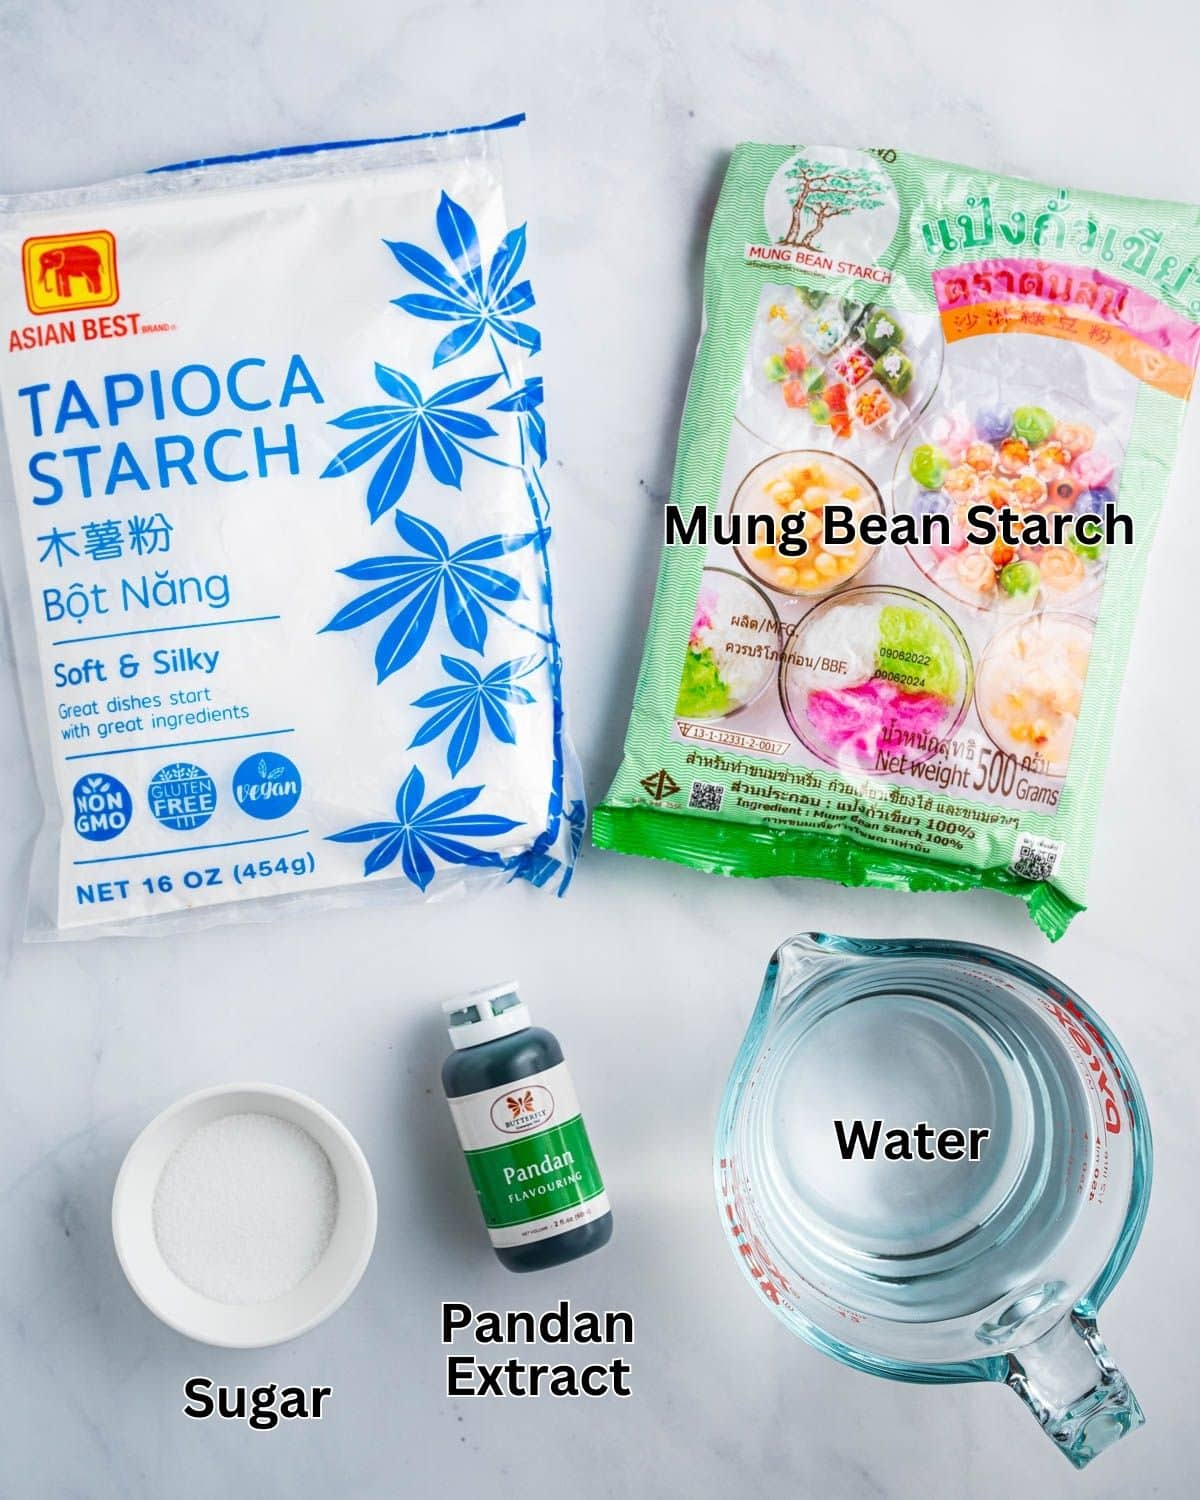 Ingredients needed for cendol (Che Banh Lot): mung bean starch, tapioca starch, sugar, pandan extract, and water.